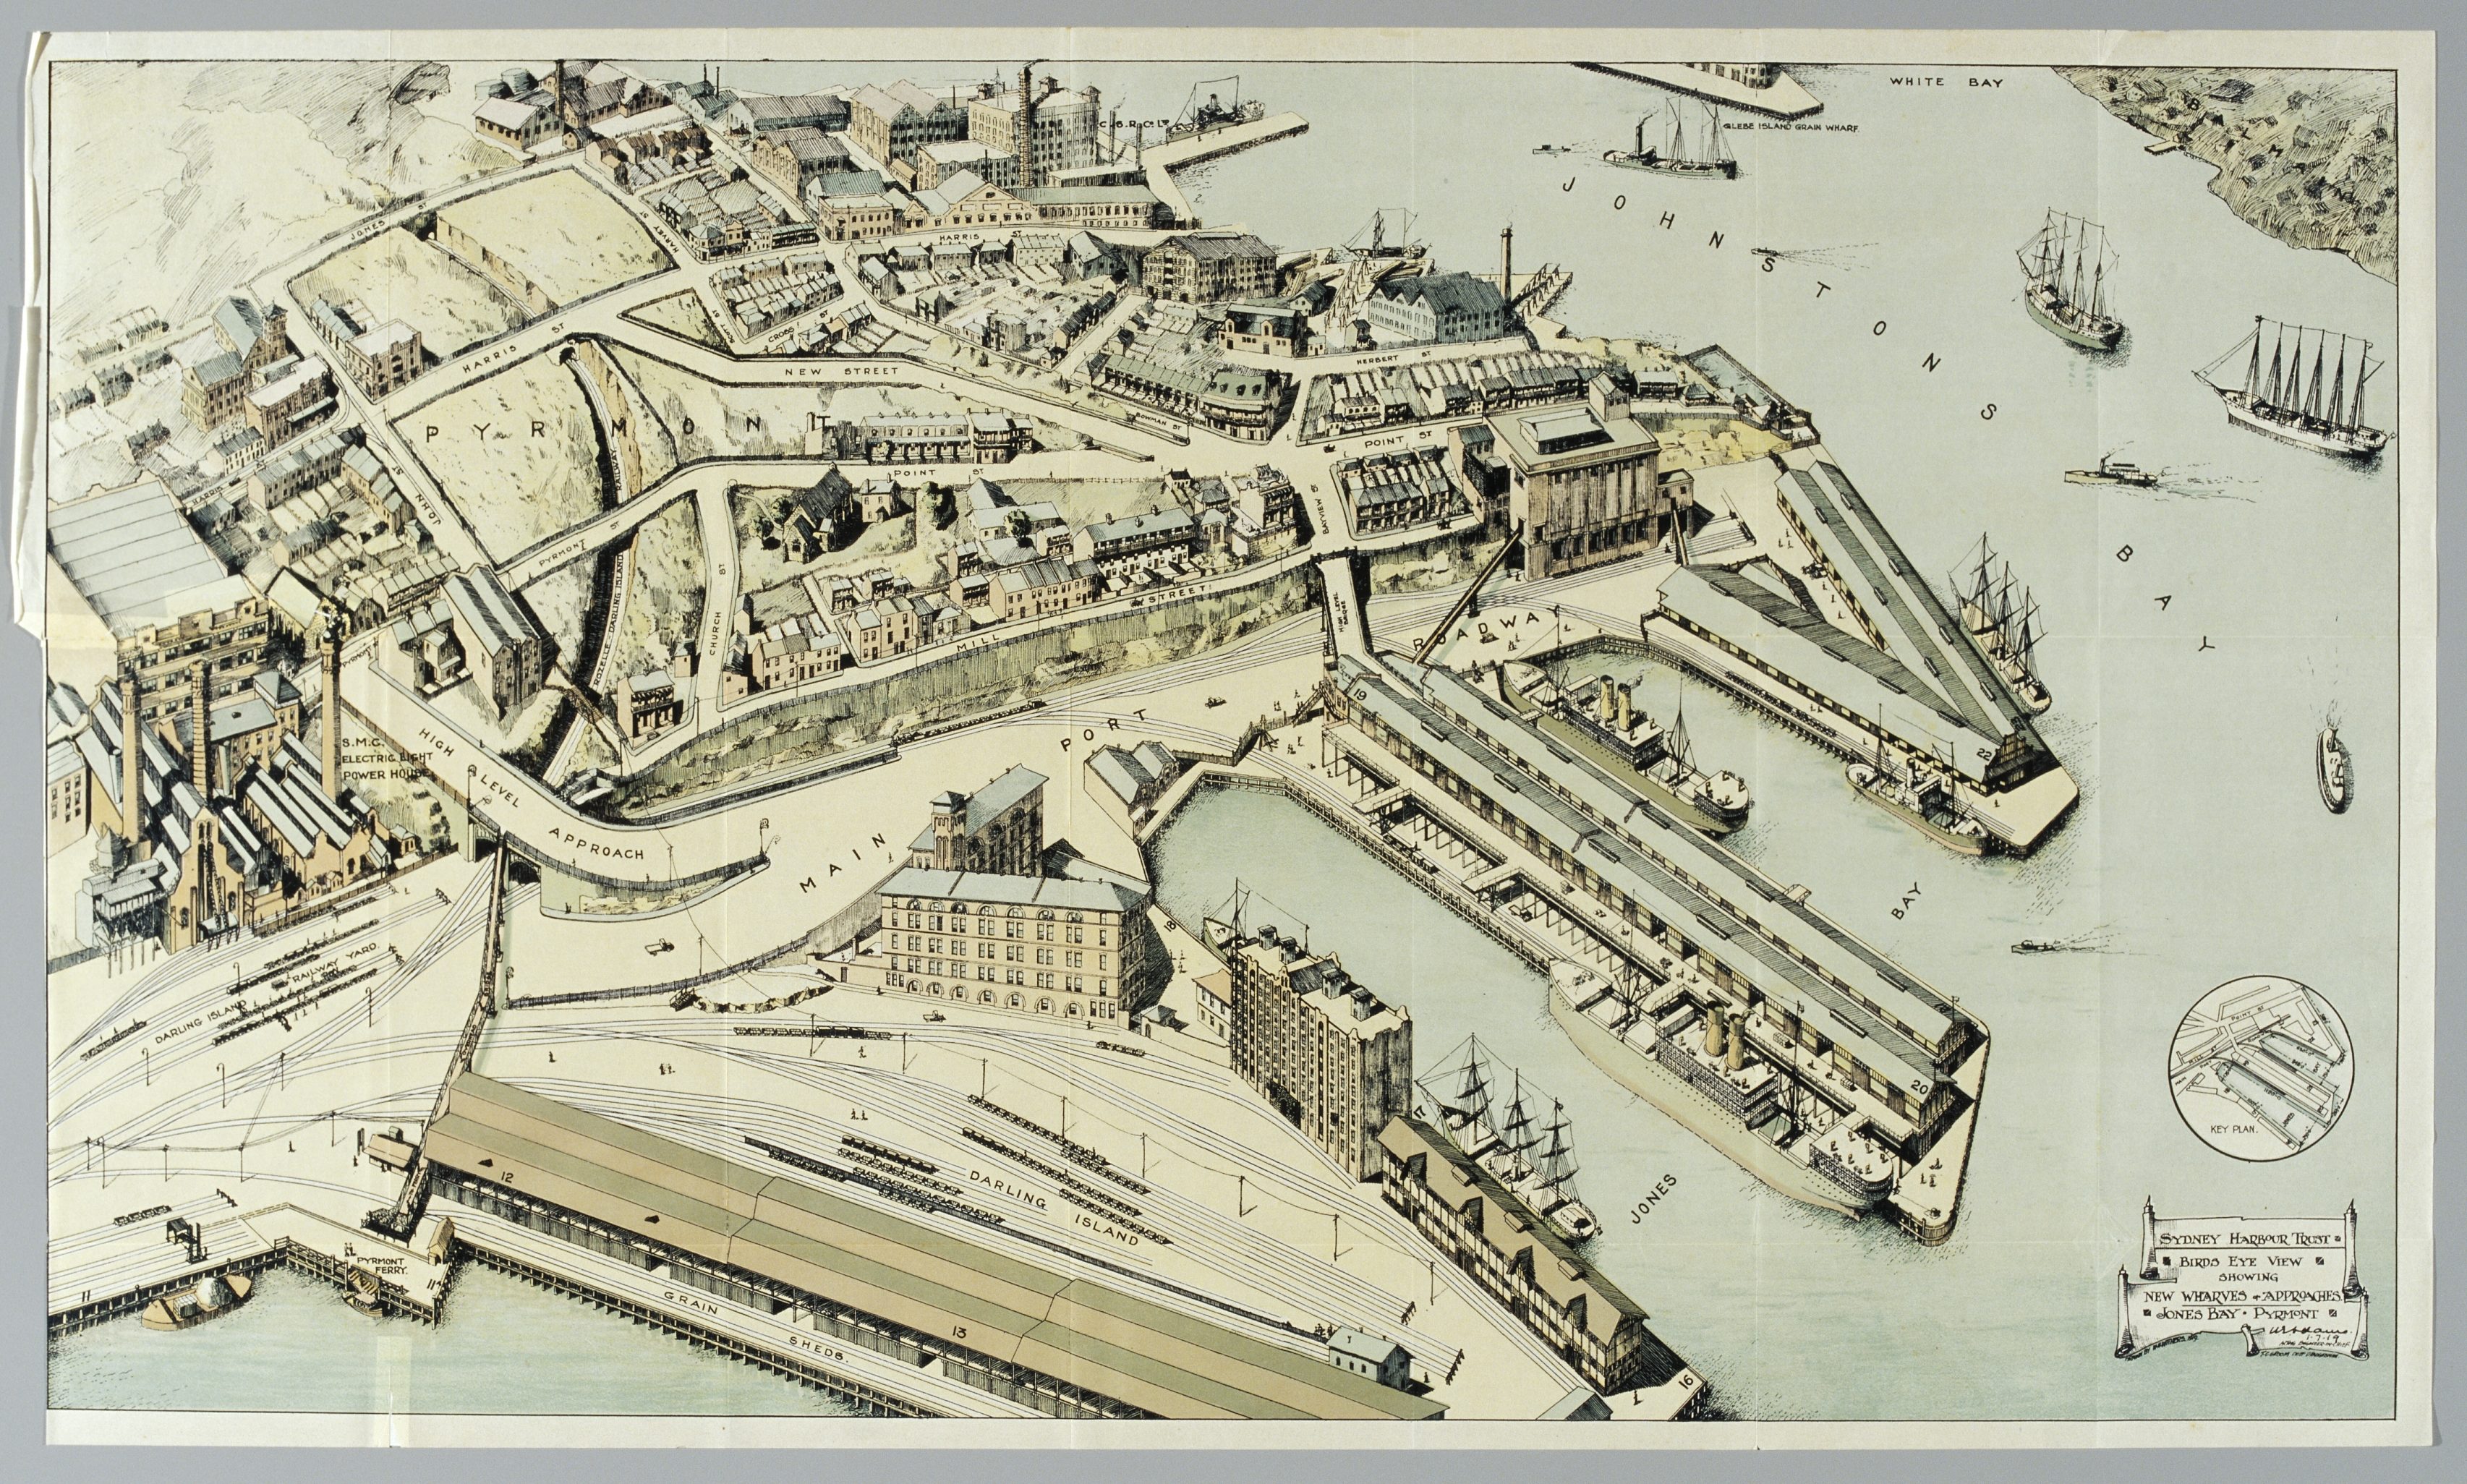 Coloured map drawn from above showing wharves and buildings.